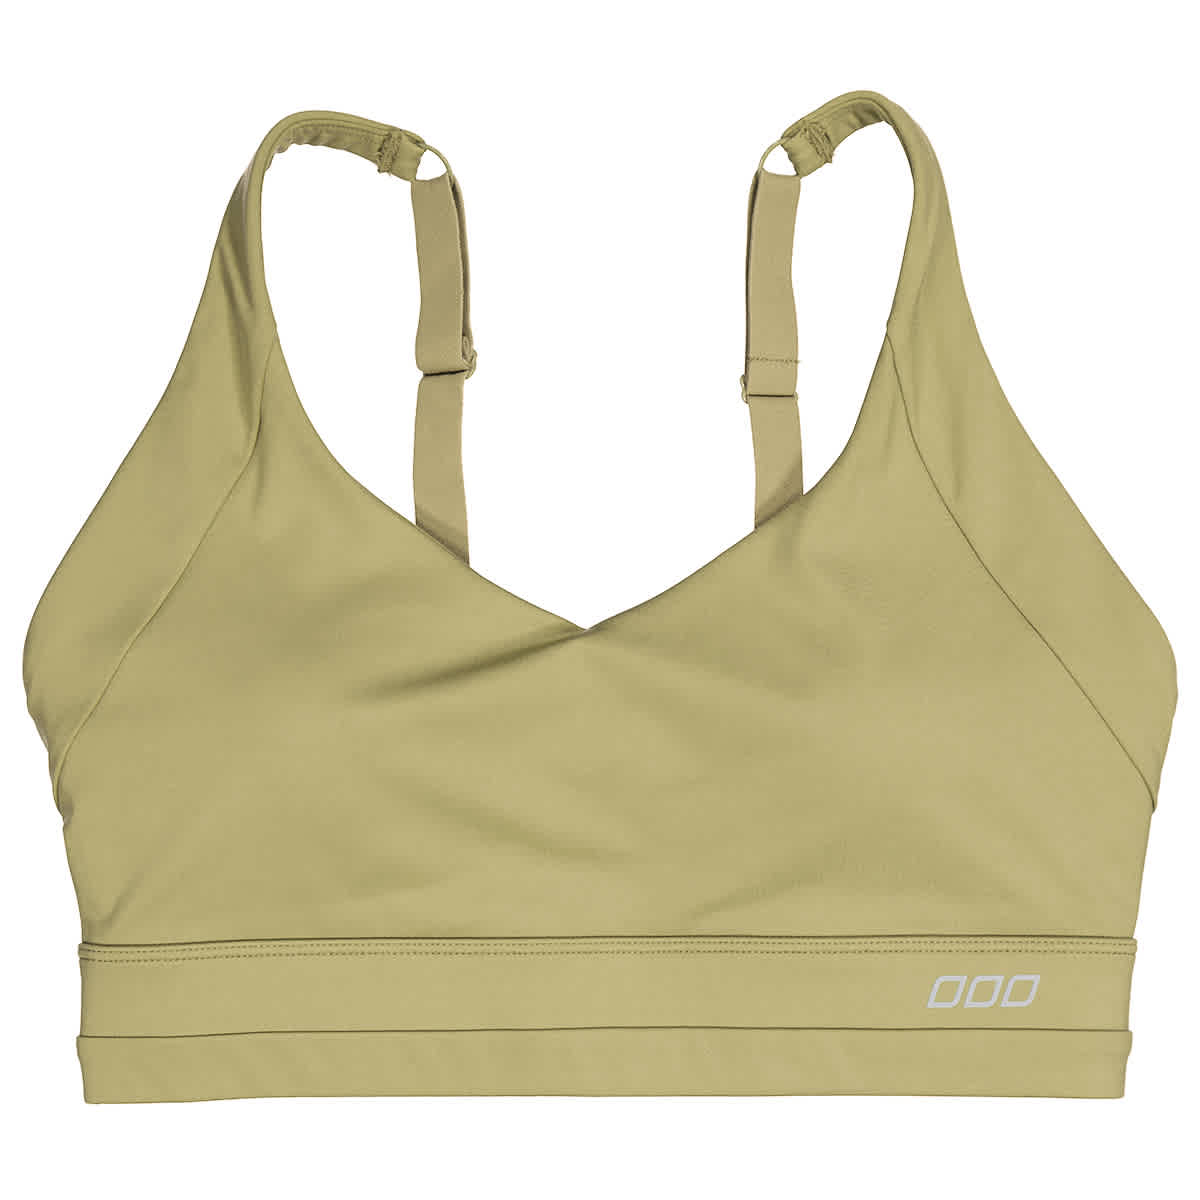 Double Time Sports Bra